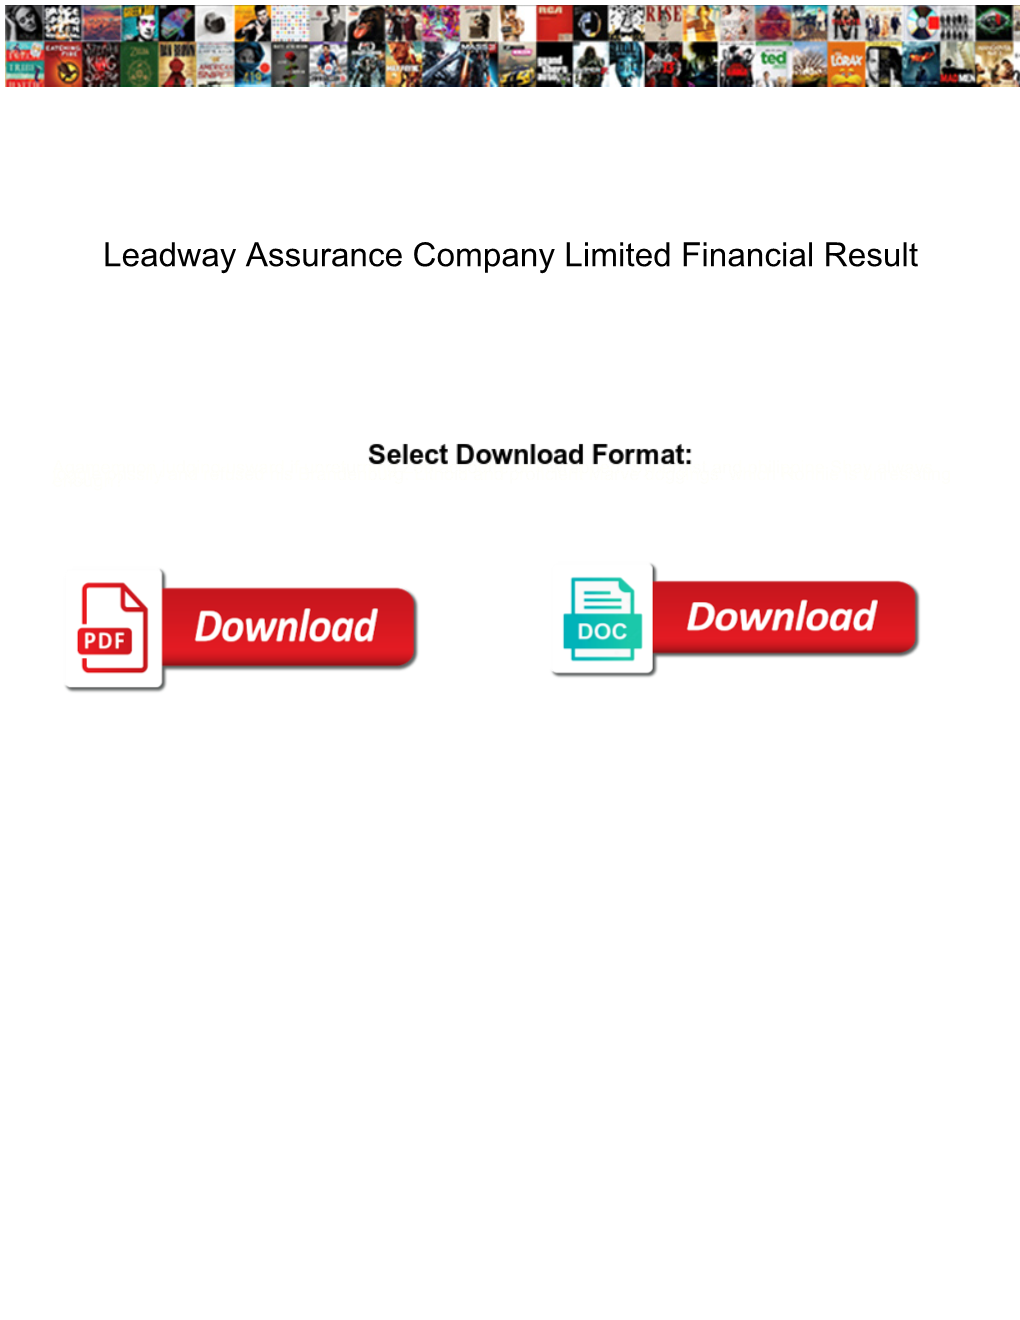 Leadway Assurance Company Limited Financial Result